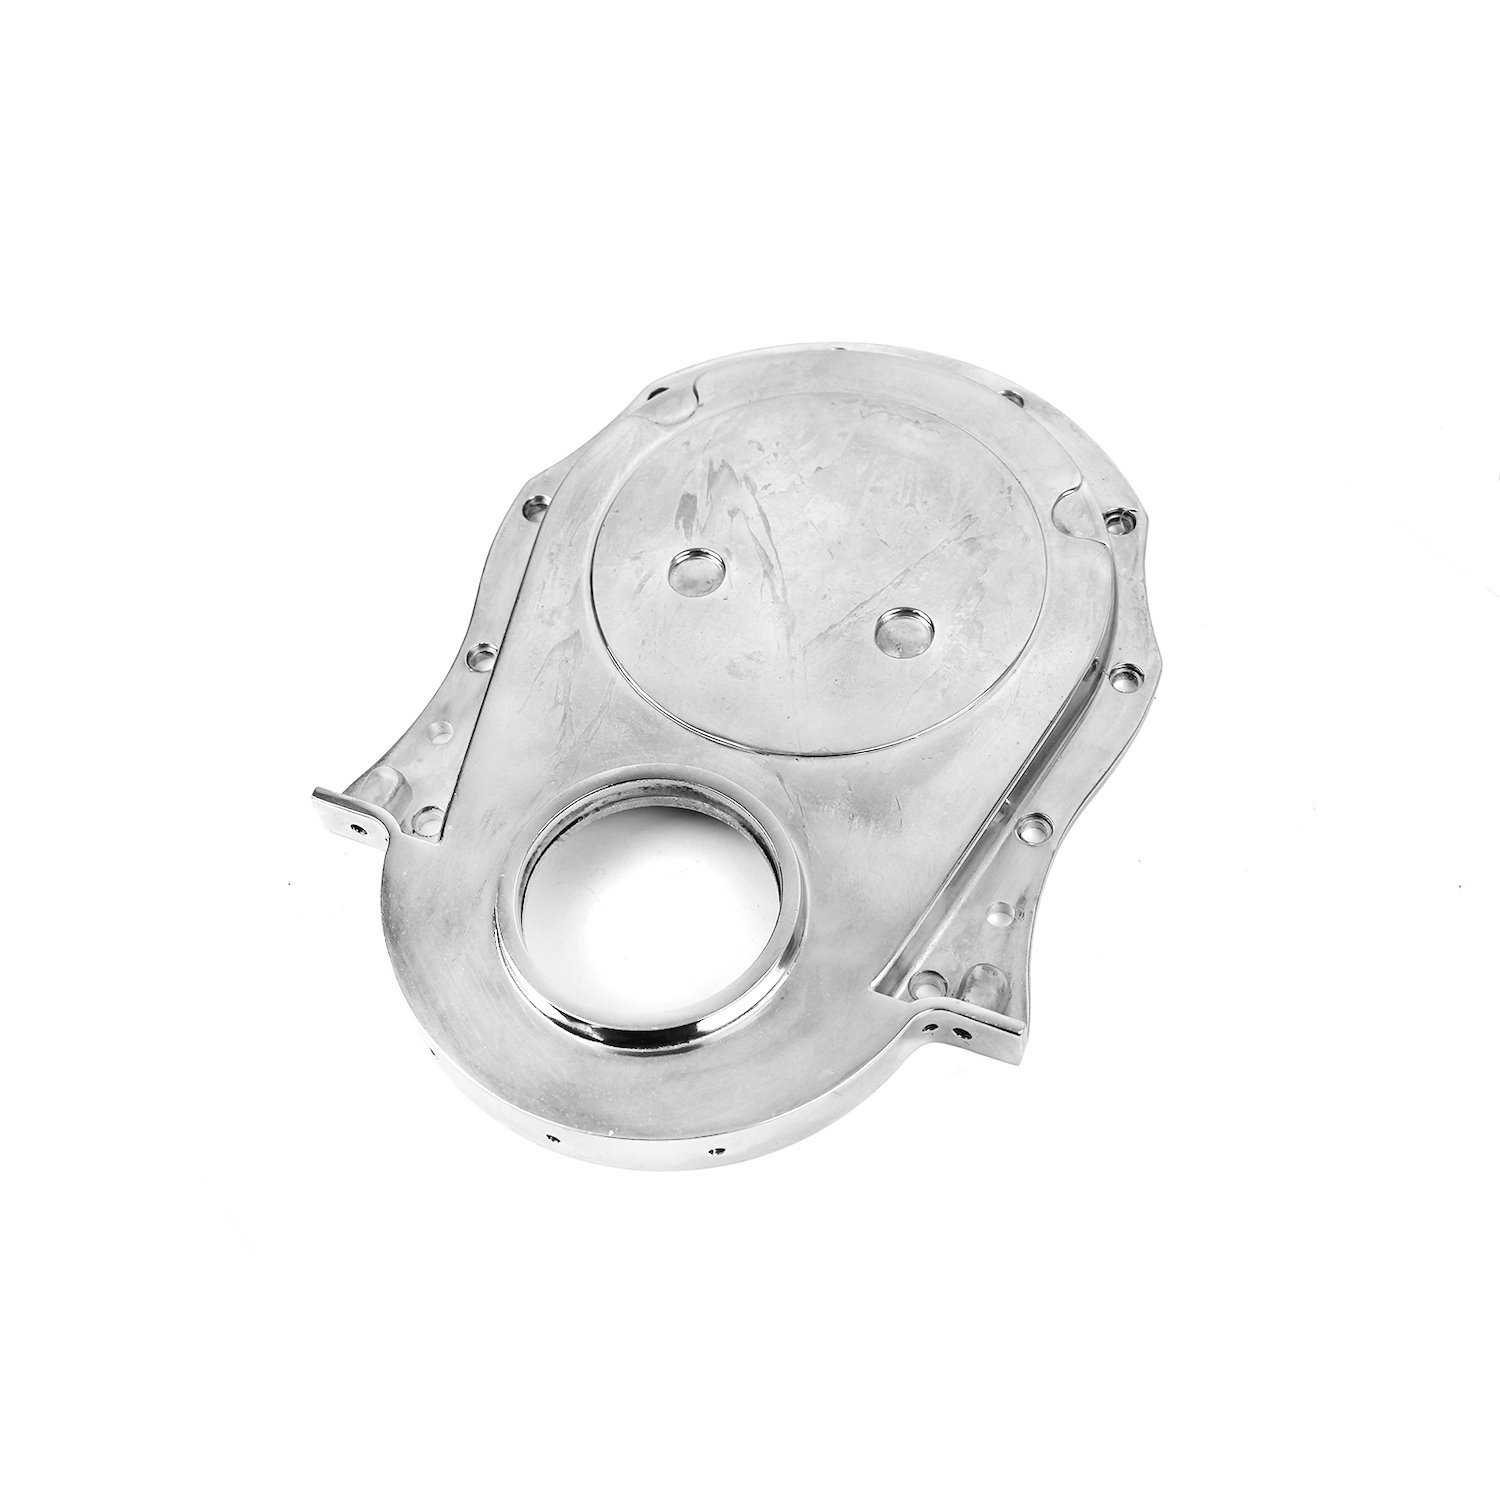 Polished Aluminum Timing Chain Cover Big Block Chevy 454 Gen 1-4